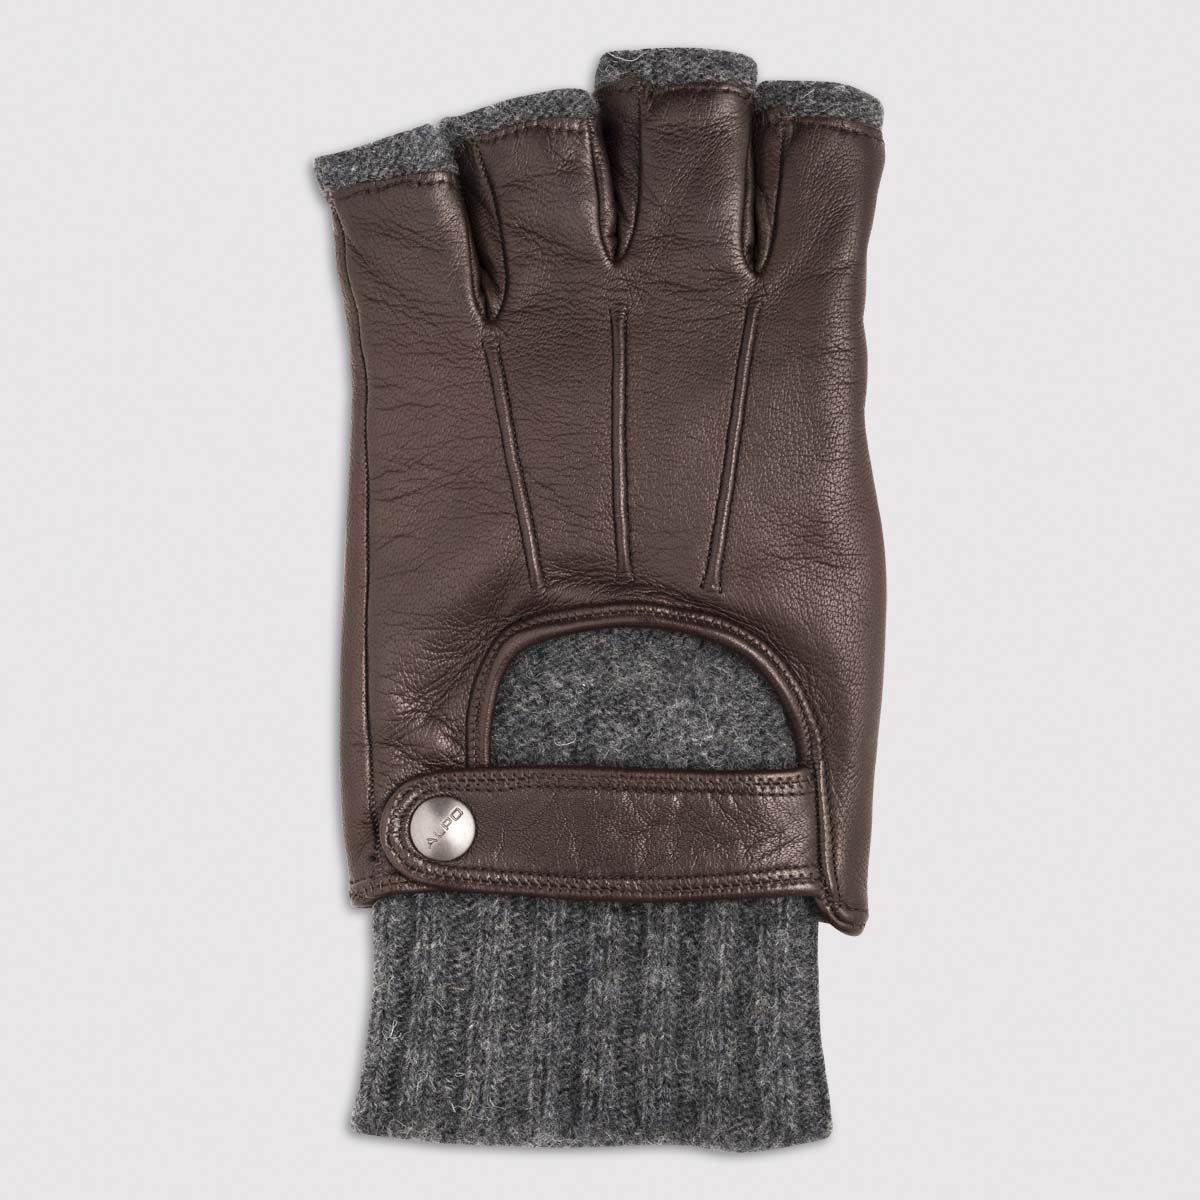 Half-Finger Nappa Leather Glove with Wool Lining in Mocca – 8.5